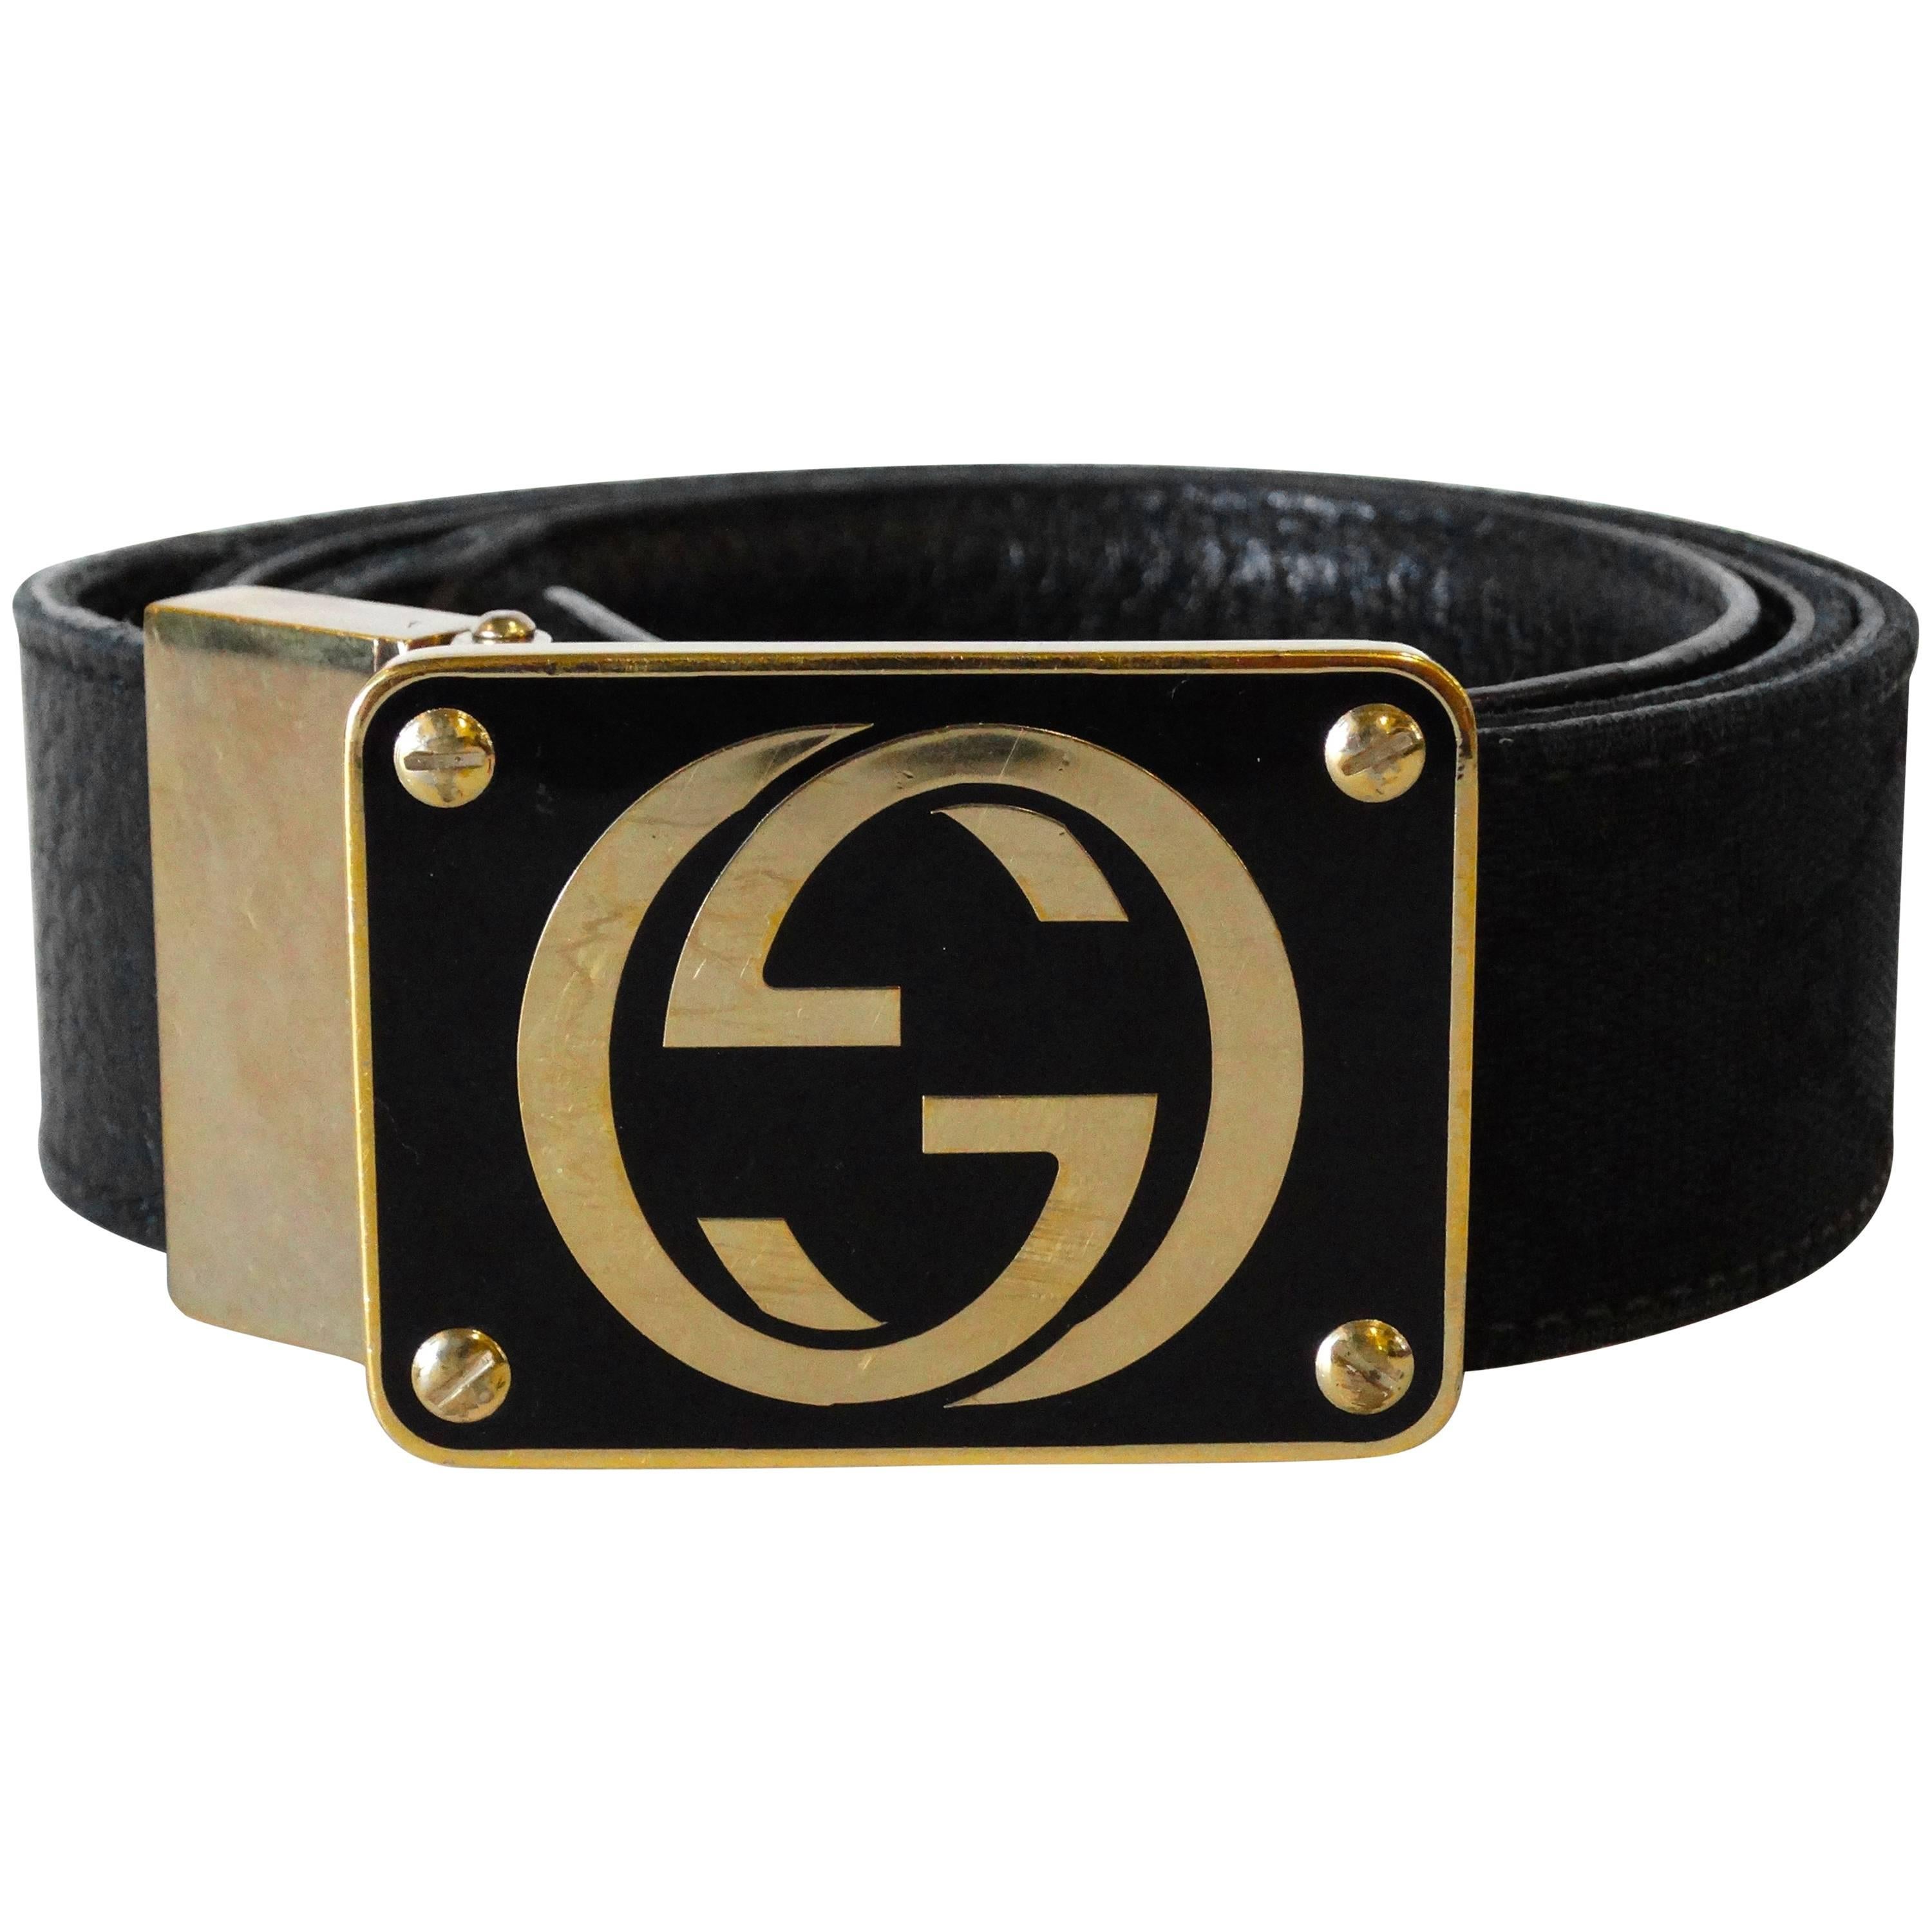 1990s Gucci Enamled Belt Buckle with Black Canvas Belt 